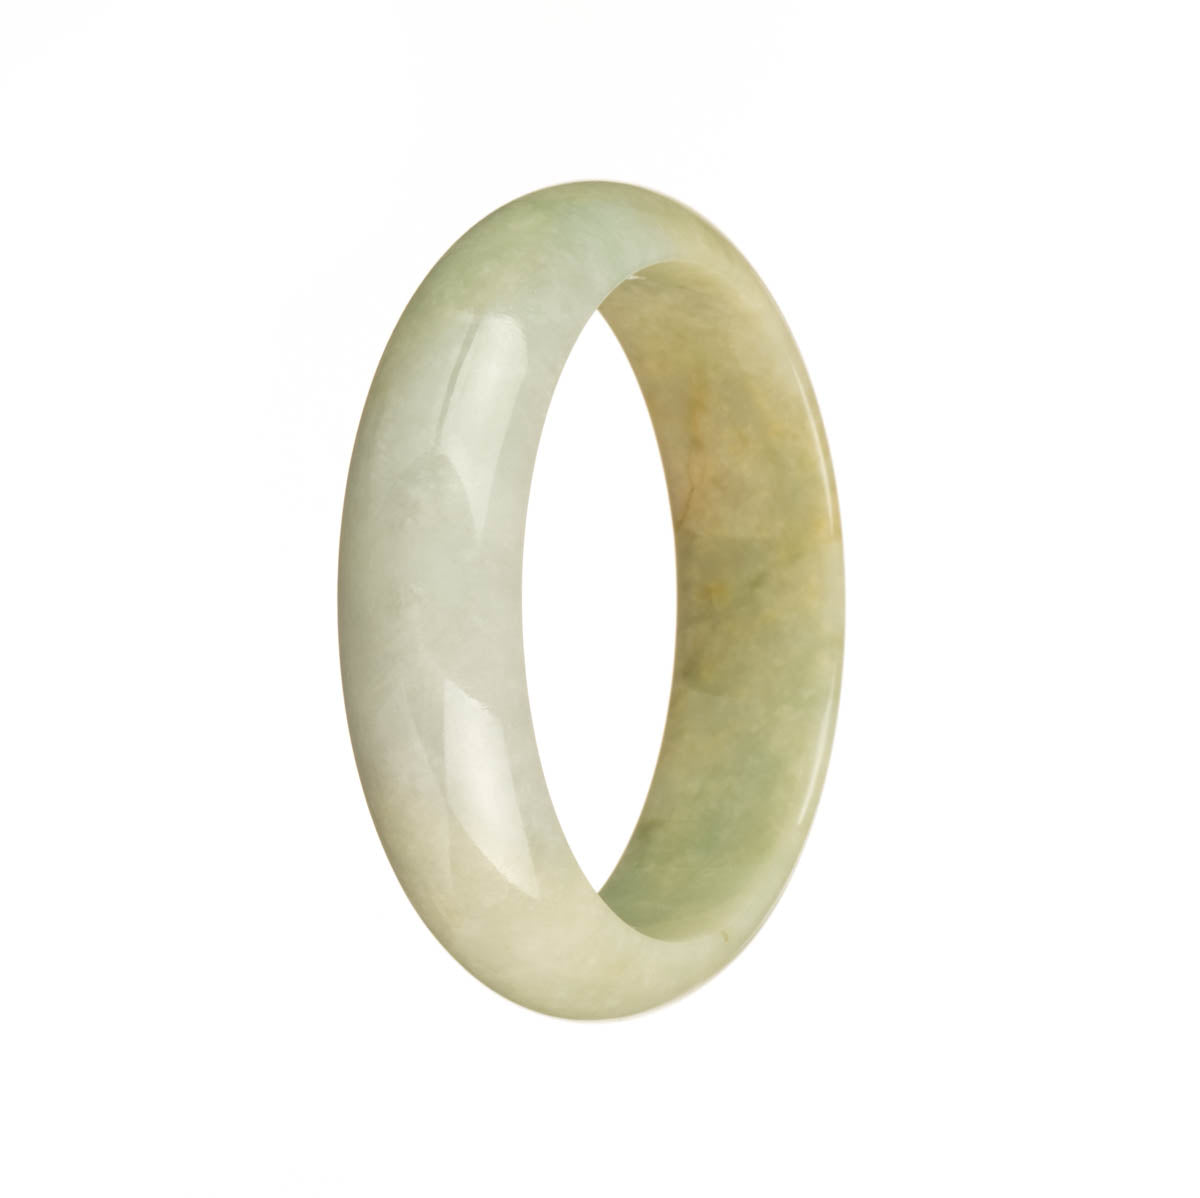 A beautiful bangle bracelet made of genuine untreated brown, pale green, and white jadeite jade, in a 53mm half moon shape. Crafted by MAYS GEMS.